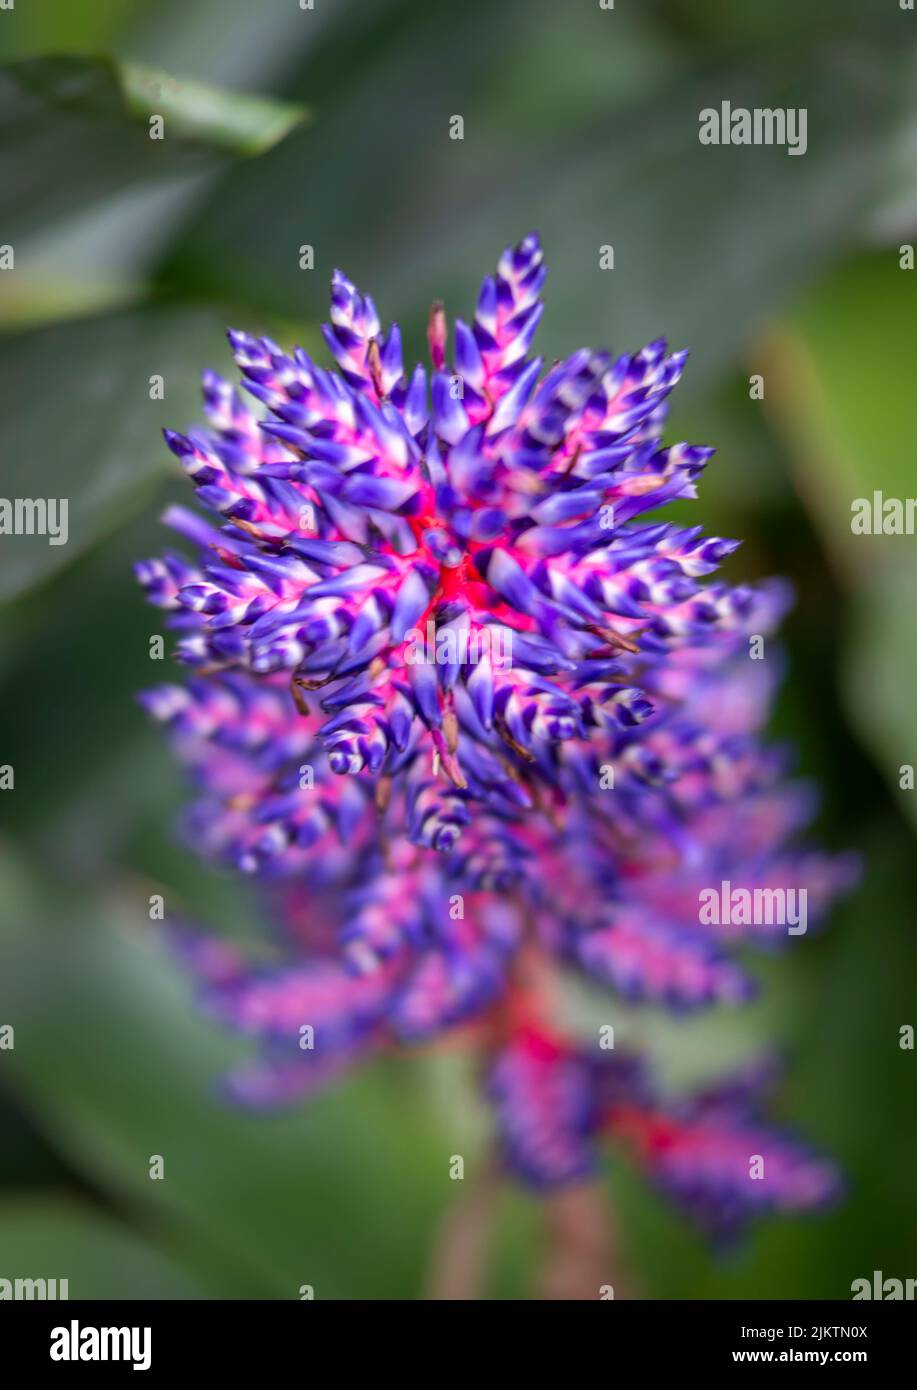 A vertical macro view of purple and pink Aechmea flower against the blurry green leaves Stock Photo